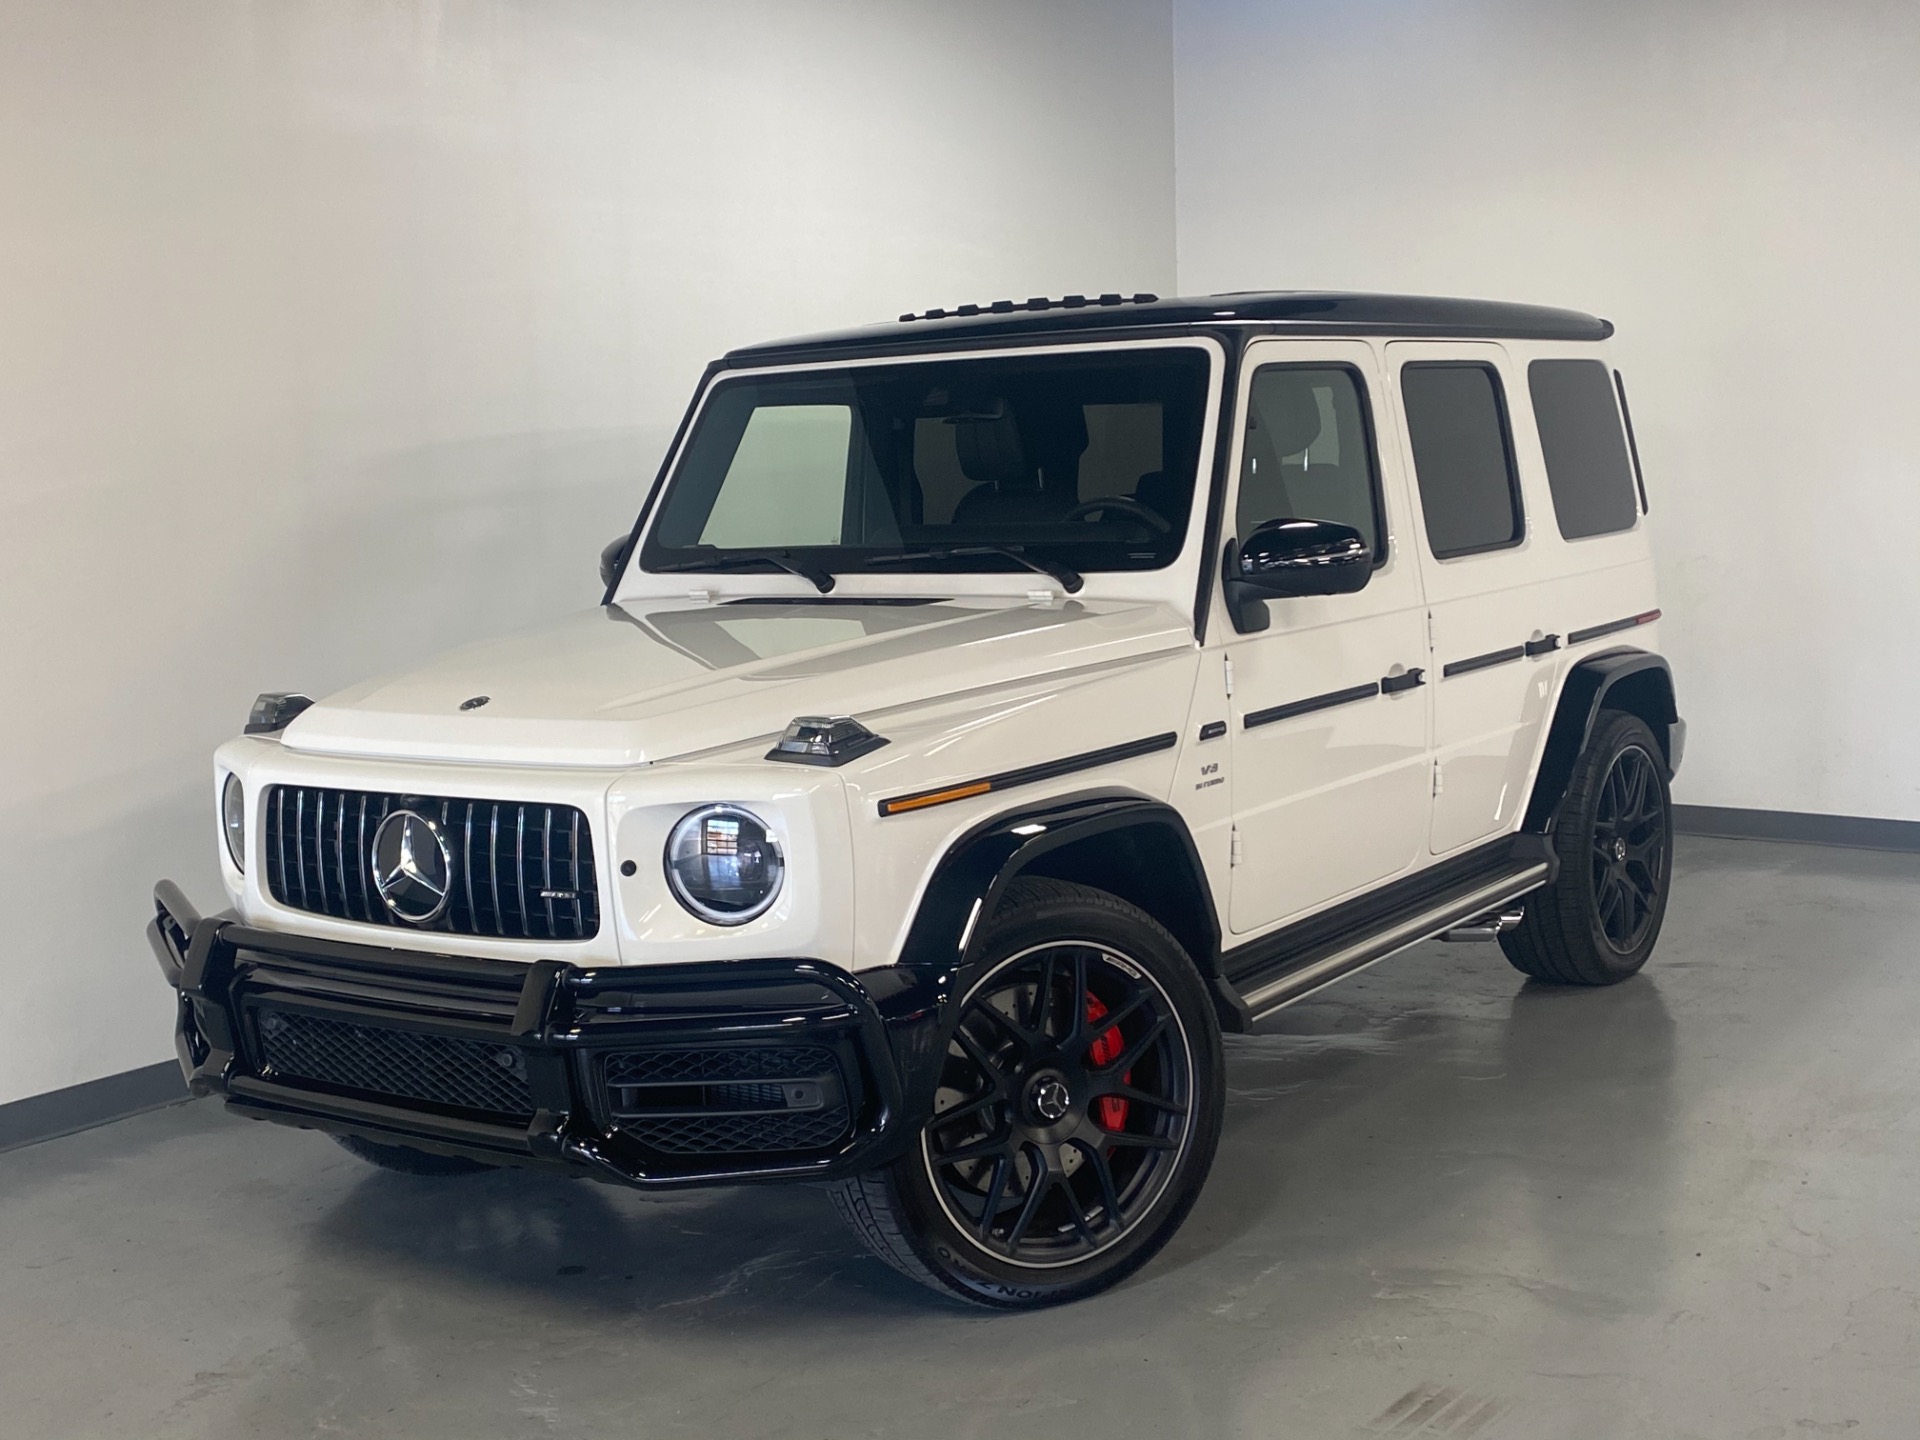 Used Polar White Mercedes Benz G Class Amg G63 Awd Amg G 63 For Sale Sold Prime Motorz Stock 3091